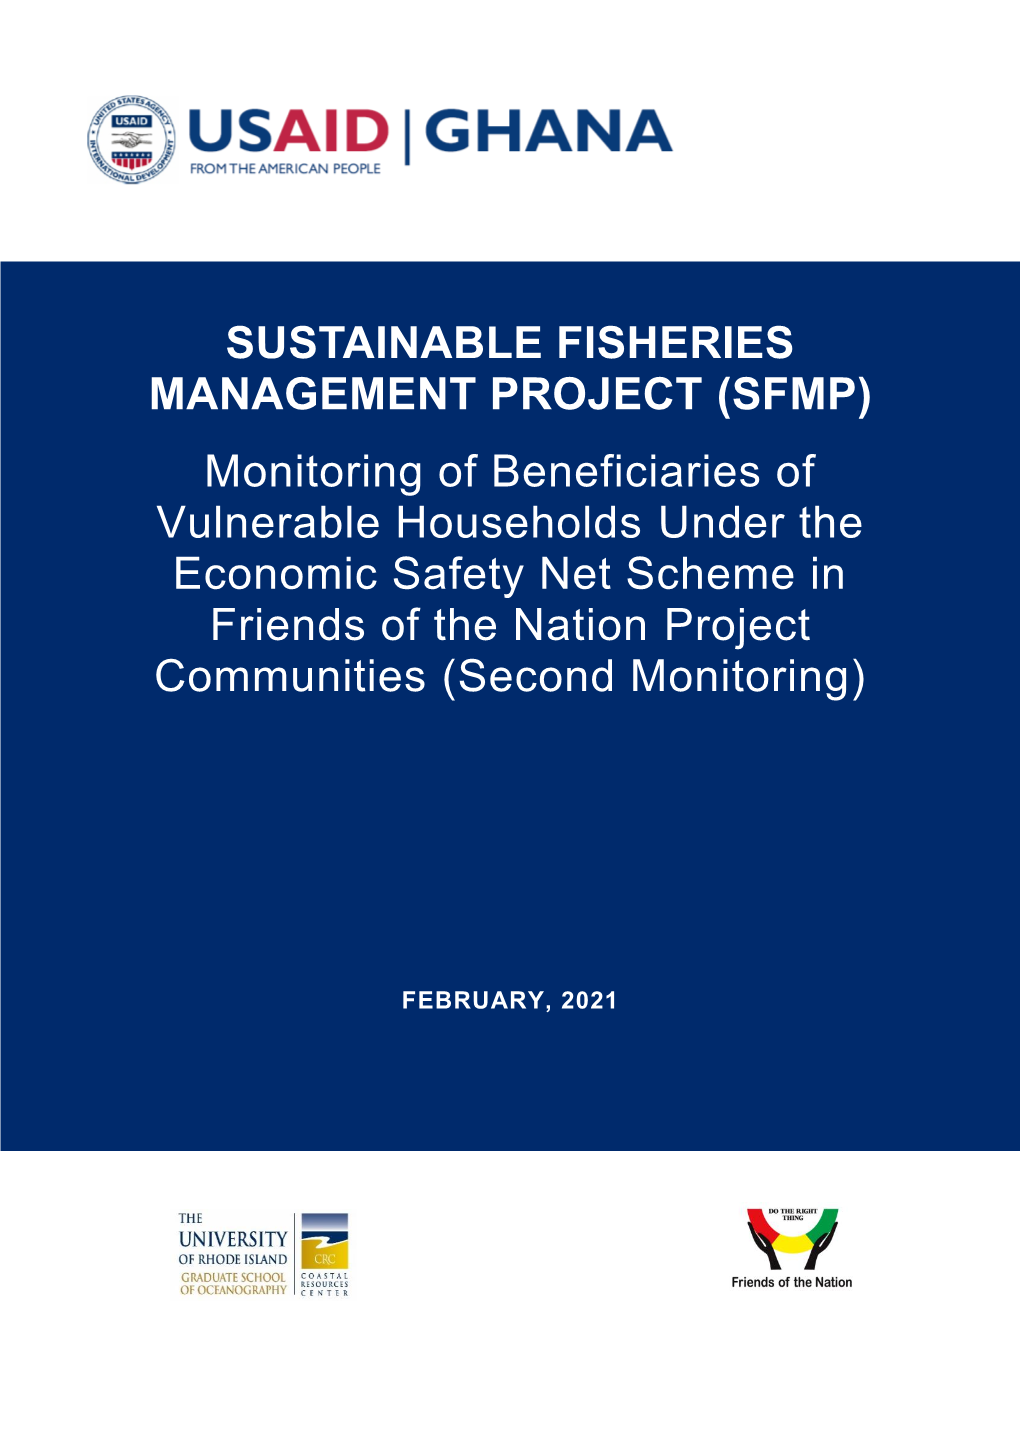 SUSTAINABLE FISHERIES MANAGEMENT PROJECT (SFMP) Monitoring of Beneficiaries of Vulnerable Households Under the Economic Safety N